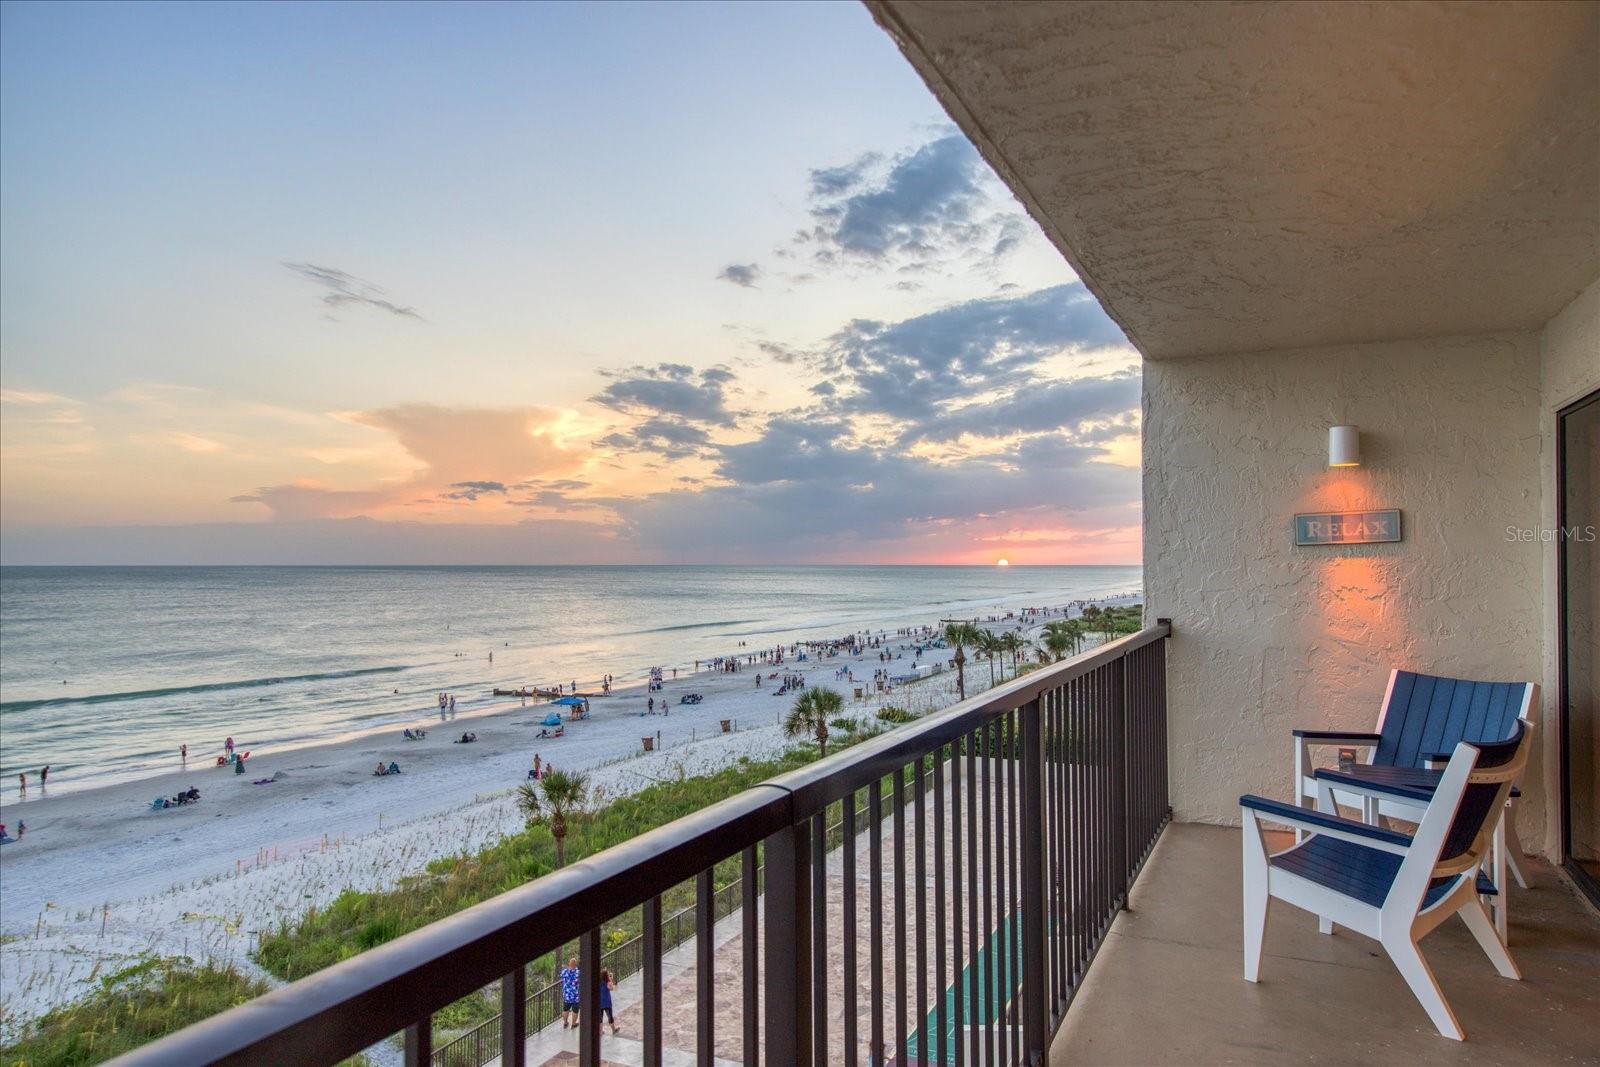 This is the condo and location you have been hoping for.  You can hear the waves and feel the peace that comes with being at the beach.